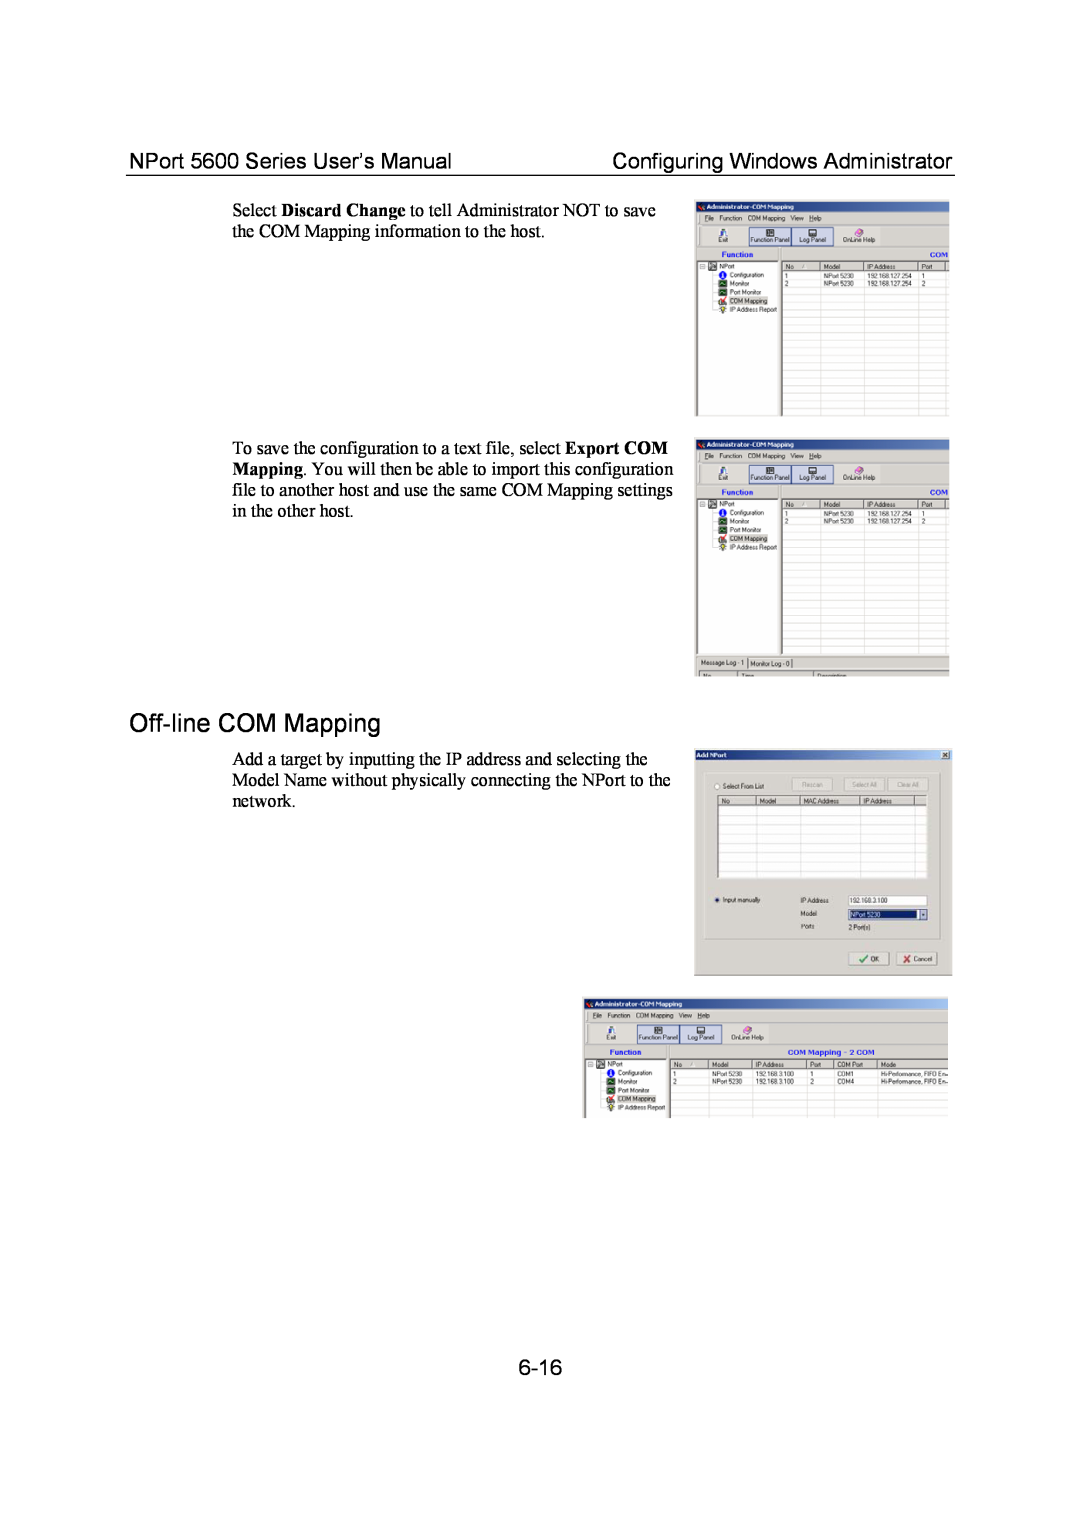 Moxa Technologies Off-line COM Mapping, 6-16, NPort 5600 Series User’s Manual, Configuring Windows Administrator 